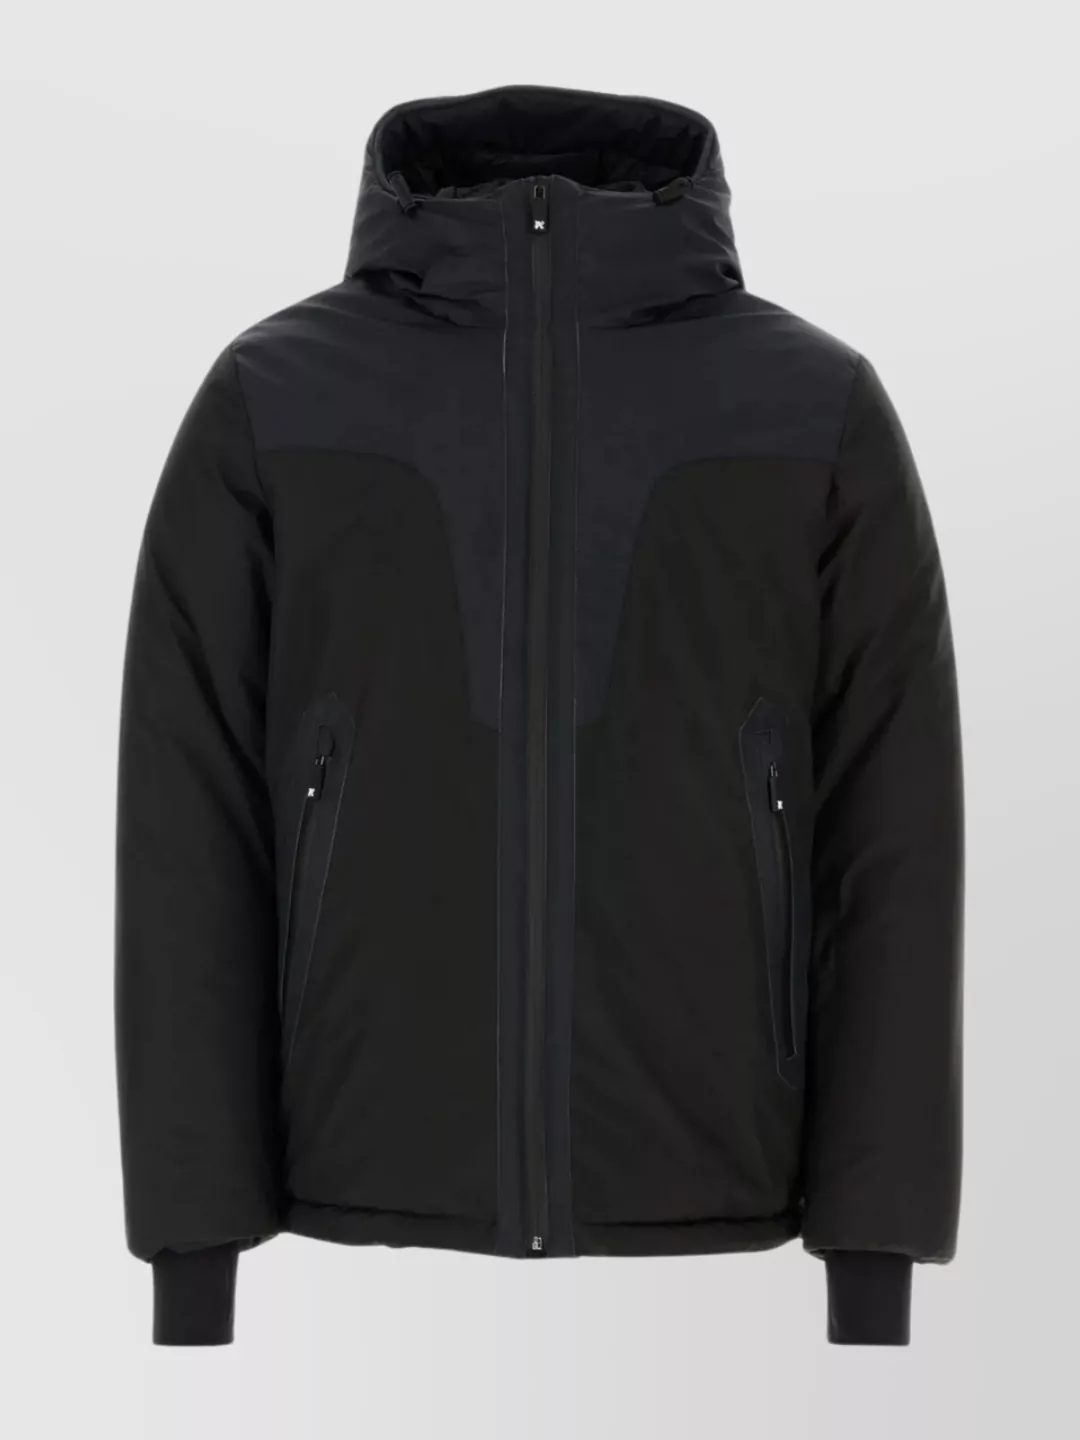 Shop Palm Angels Pa Ski Club Jacket With Hood And Front Zip Pockets